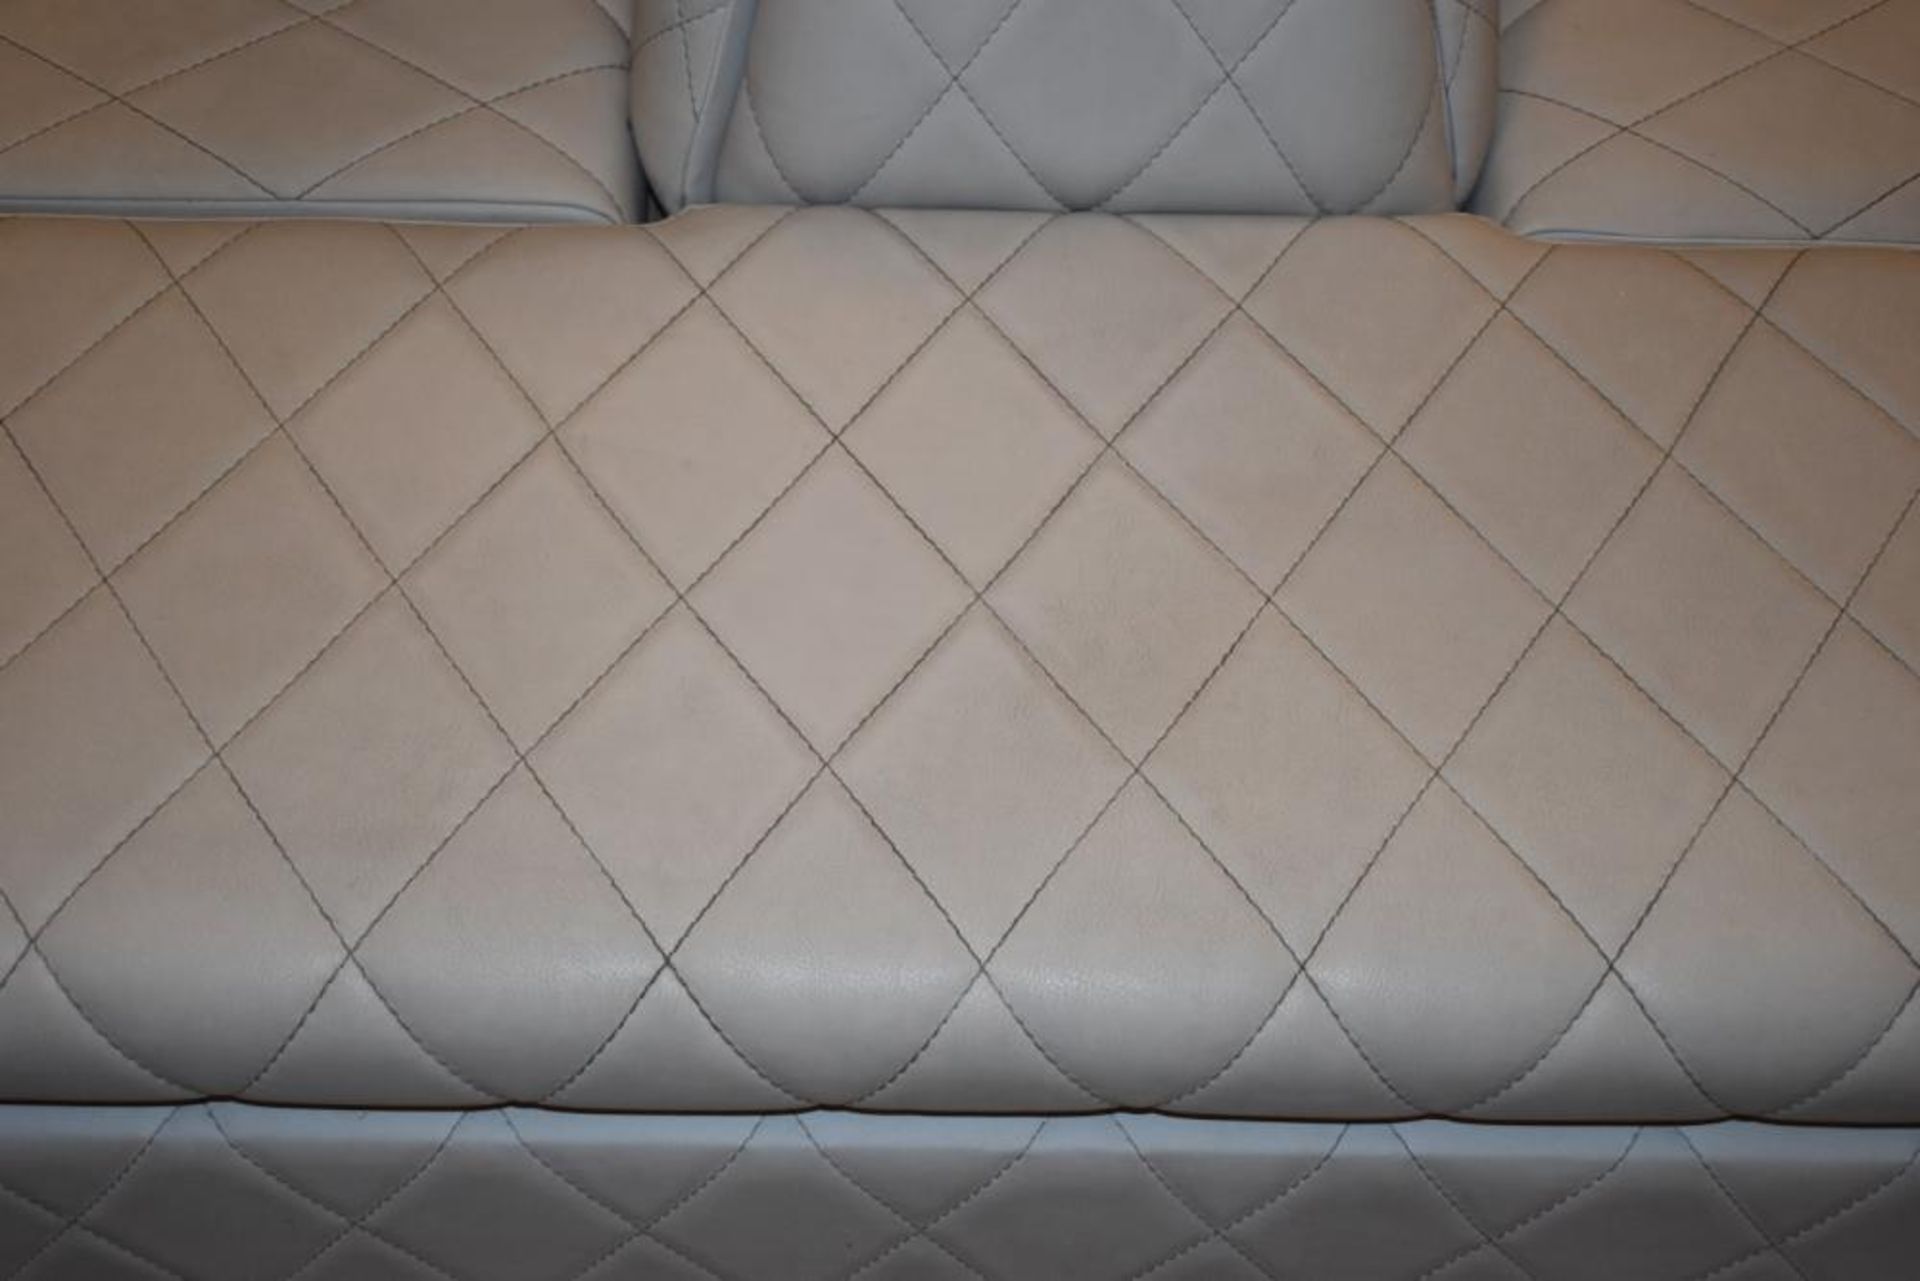 1 x Central Seating Banquette in a Contemporary Diamond Faux Grey Leather - Quality Build With Under - Image 4 of 9